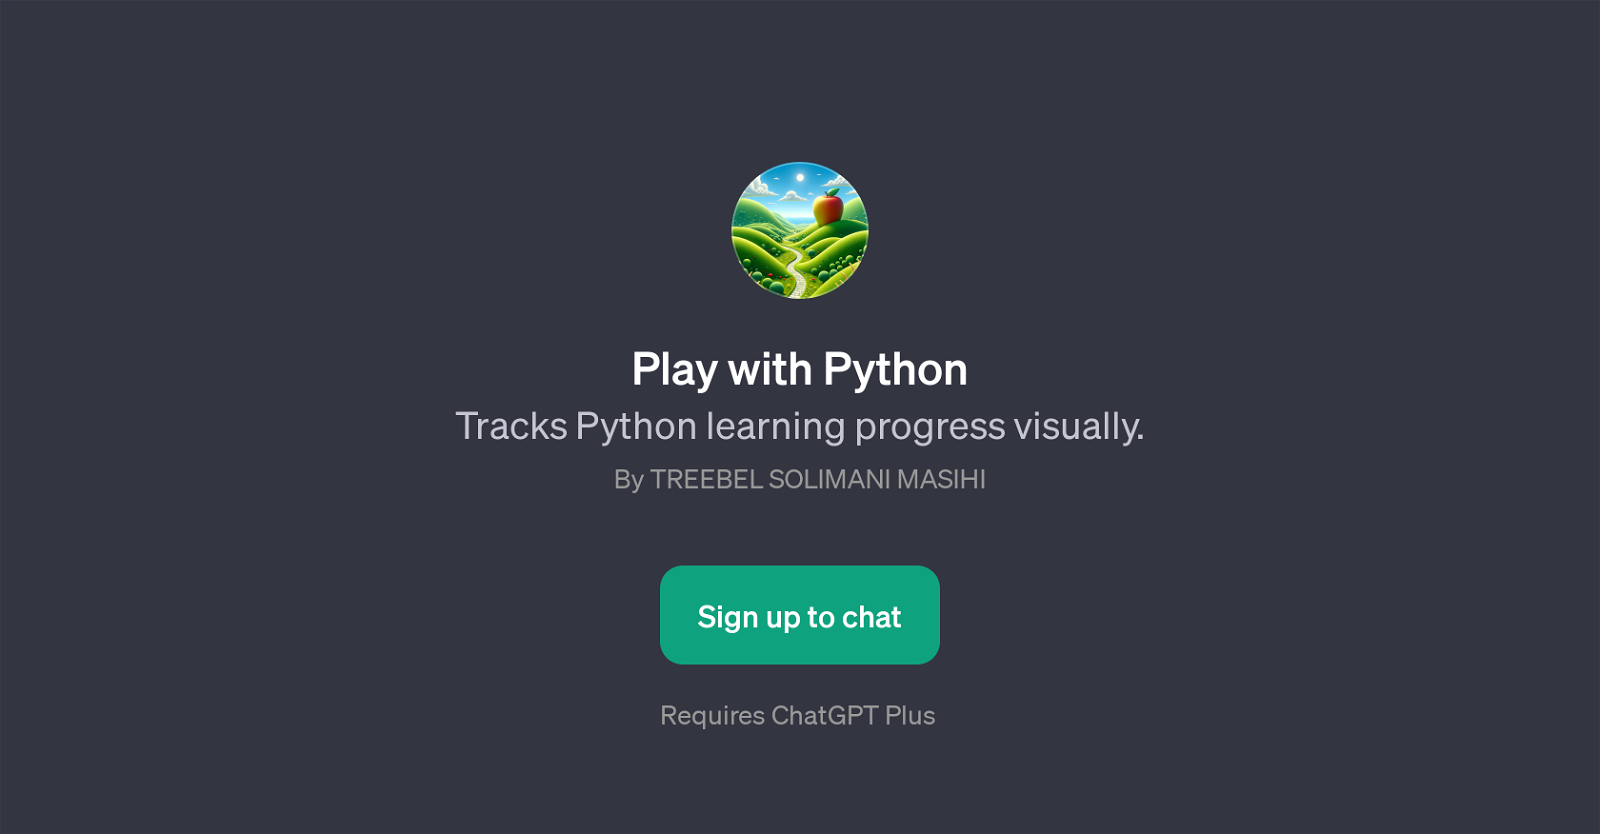 Play with Python website